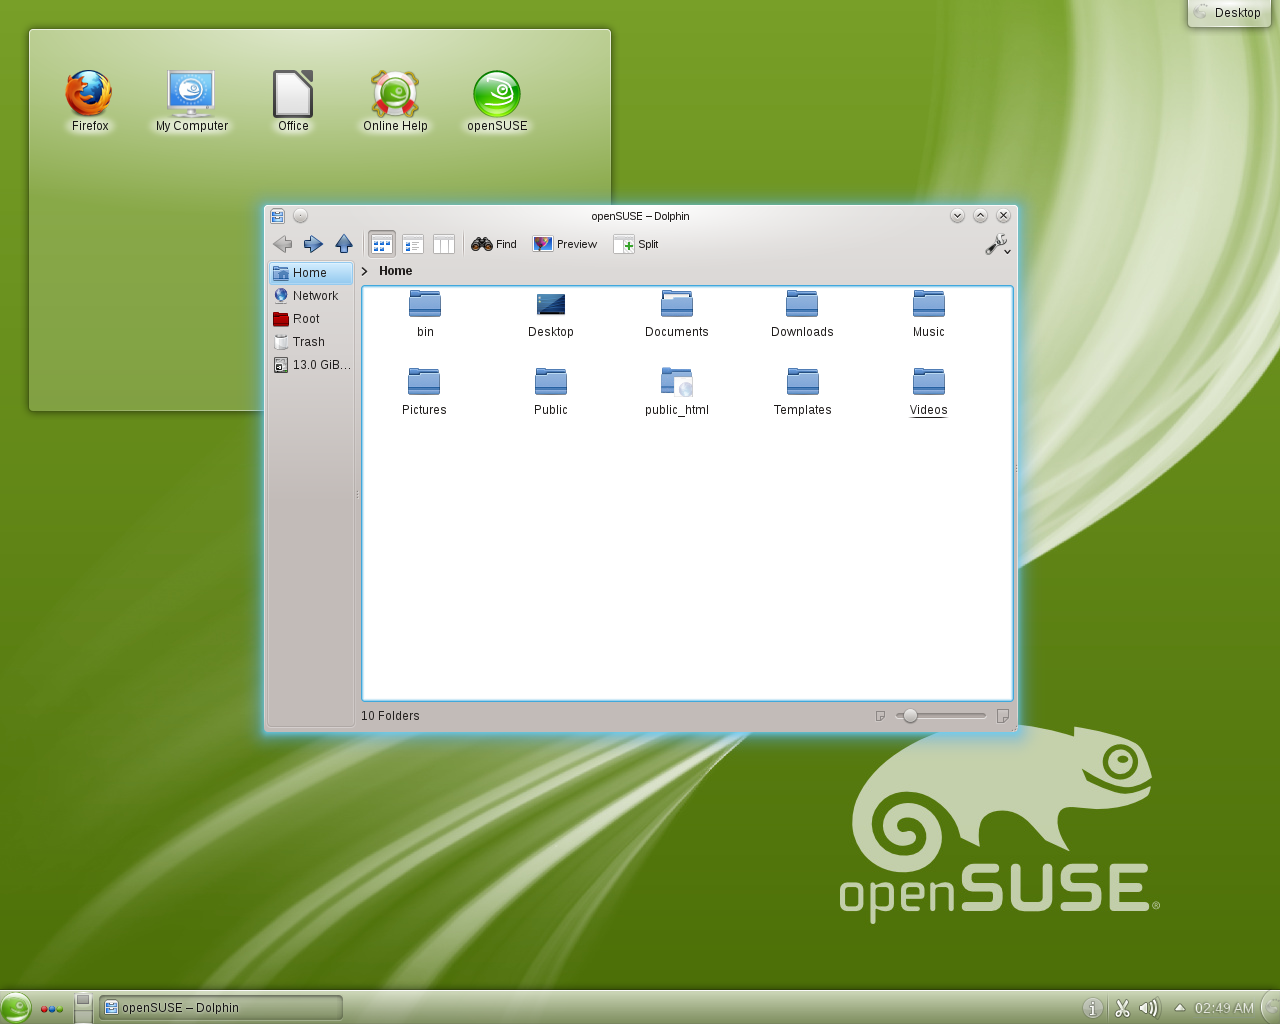 Opensuse-12.1-en-kde-dolphin.png